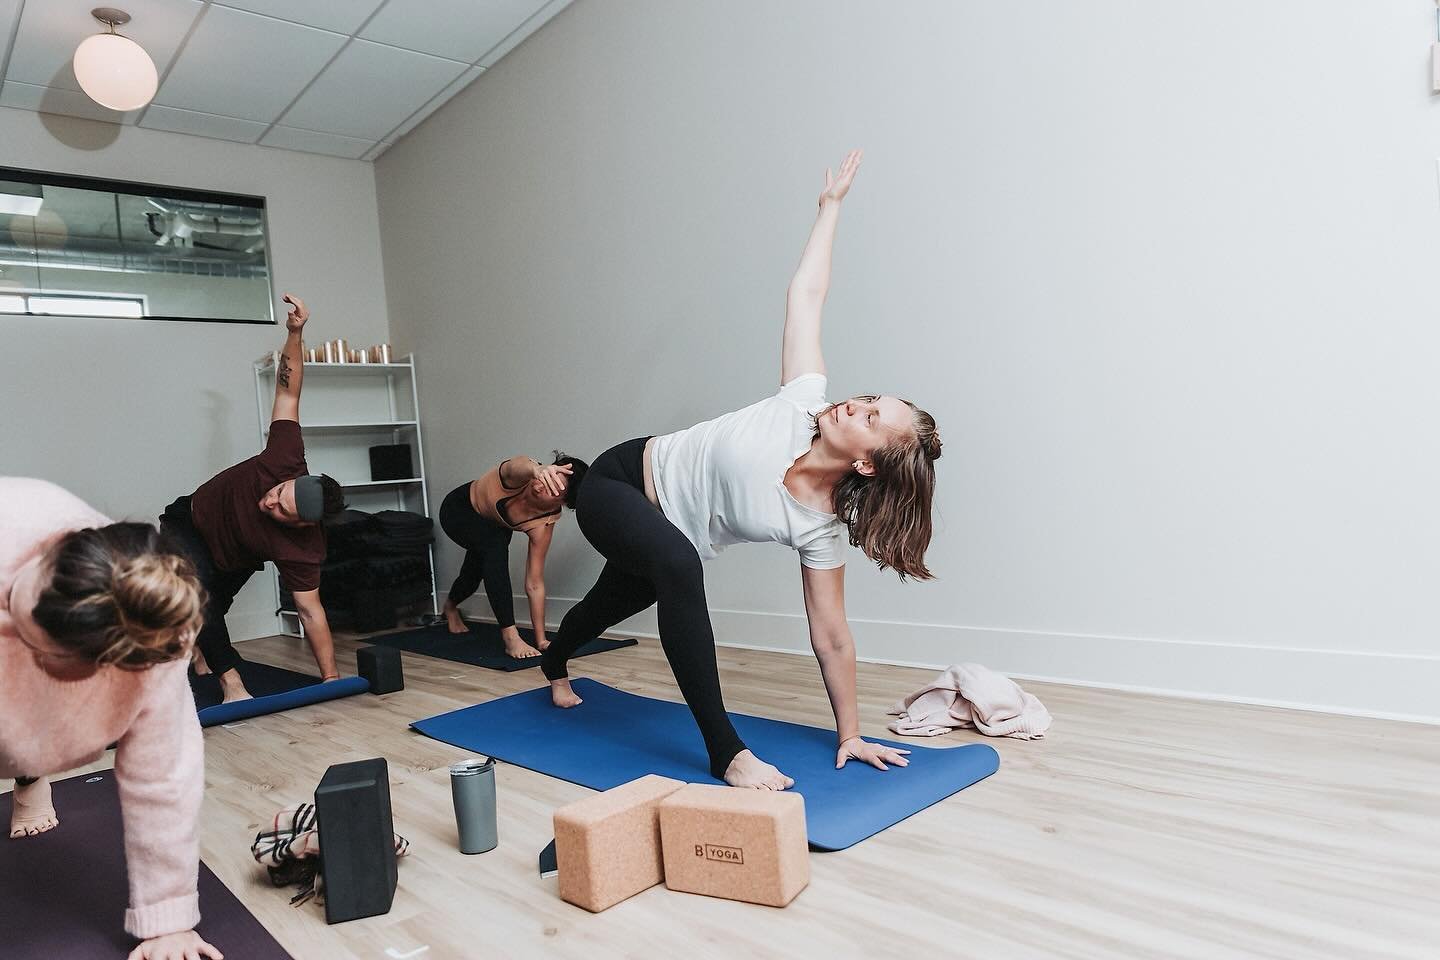 🌟 Exciting News! 🌟 Karma Yoga is moving to a NEW time slot! Starting next Friday (5/3), join us from 6pm to 7pm for an hour of mindful practice and giving back to our community. 

We&rsquo;re excited to be able to offer a later time to accommodate 